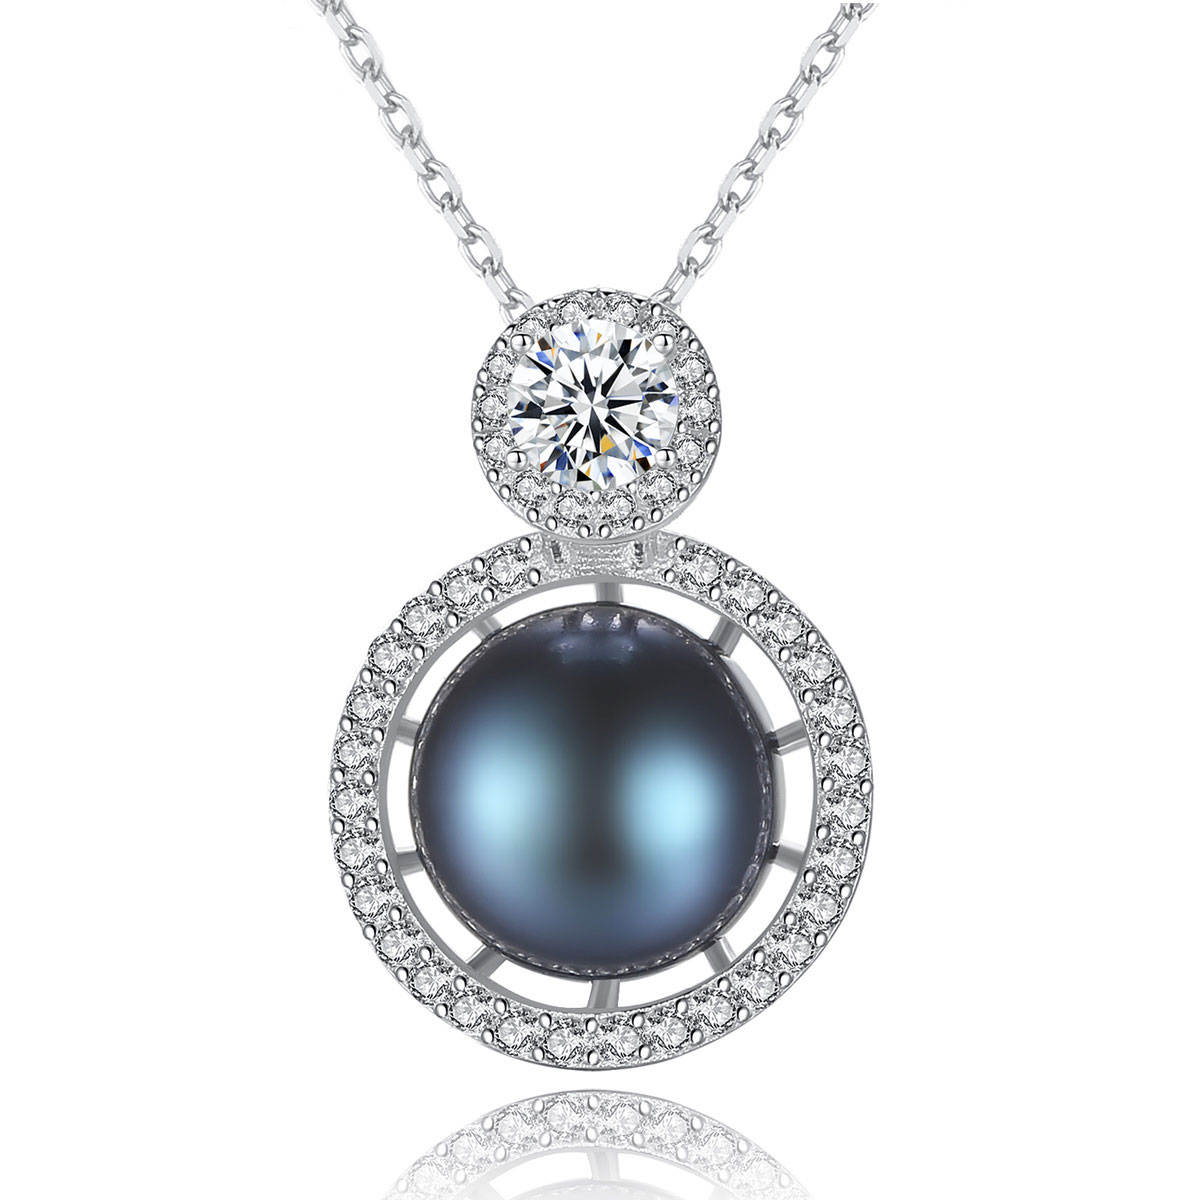 3A Cz Freshwater Pearl Micro Set Sterling Silver Pendant Necklace